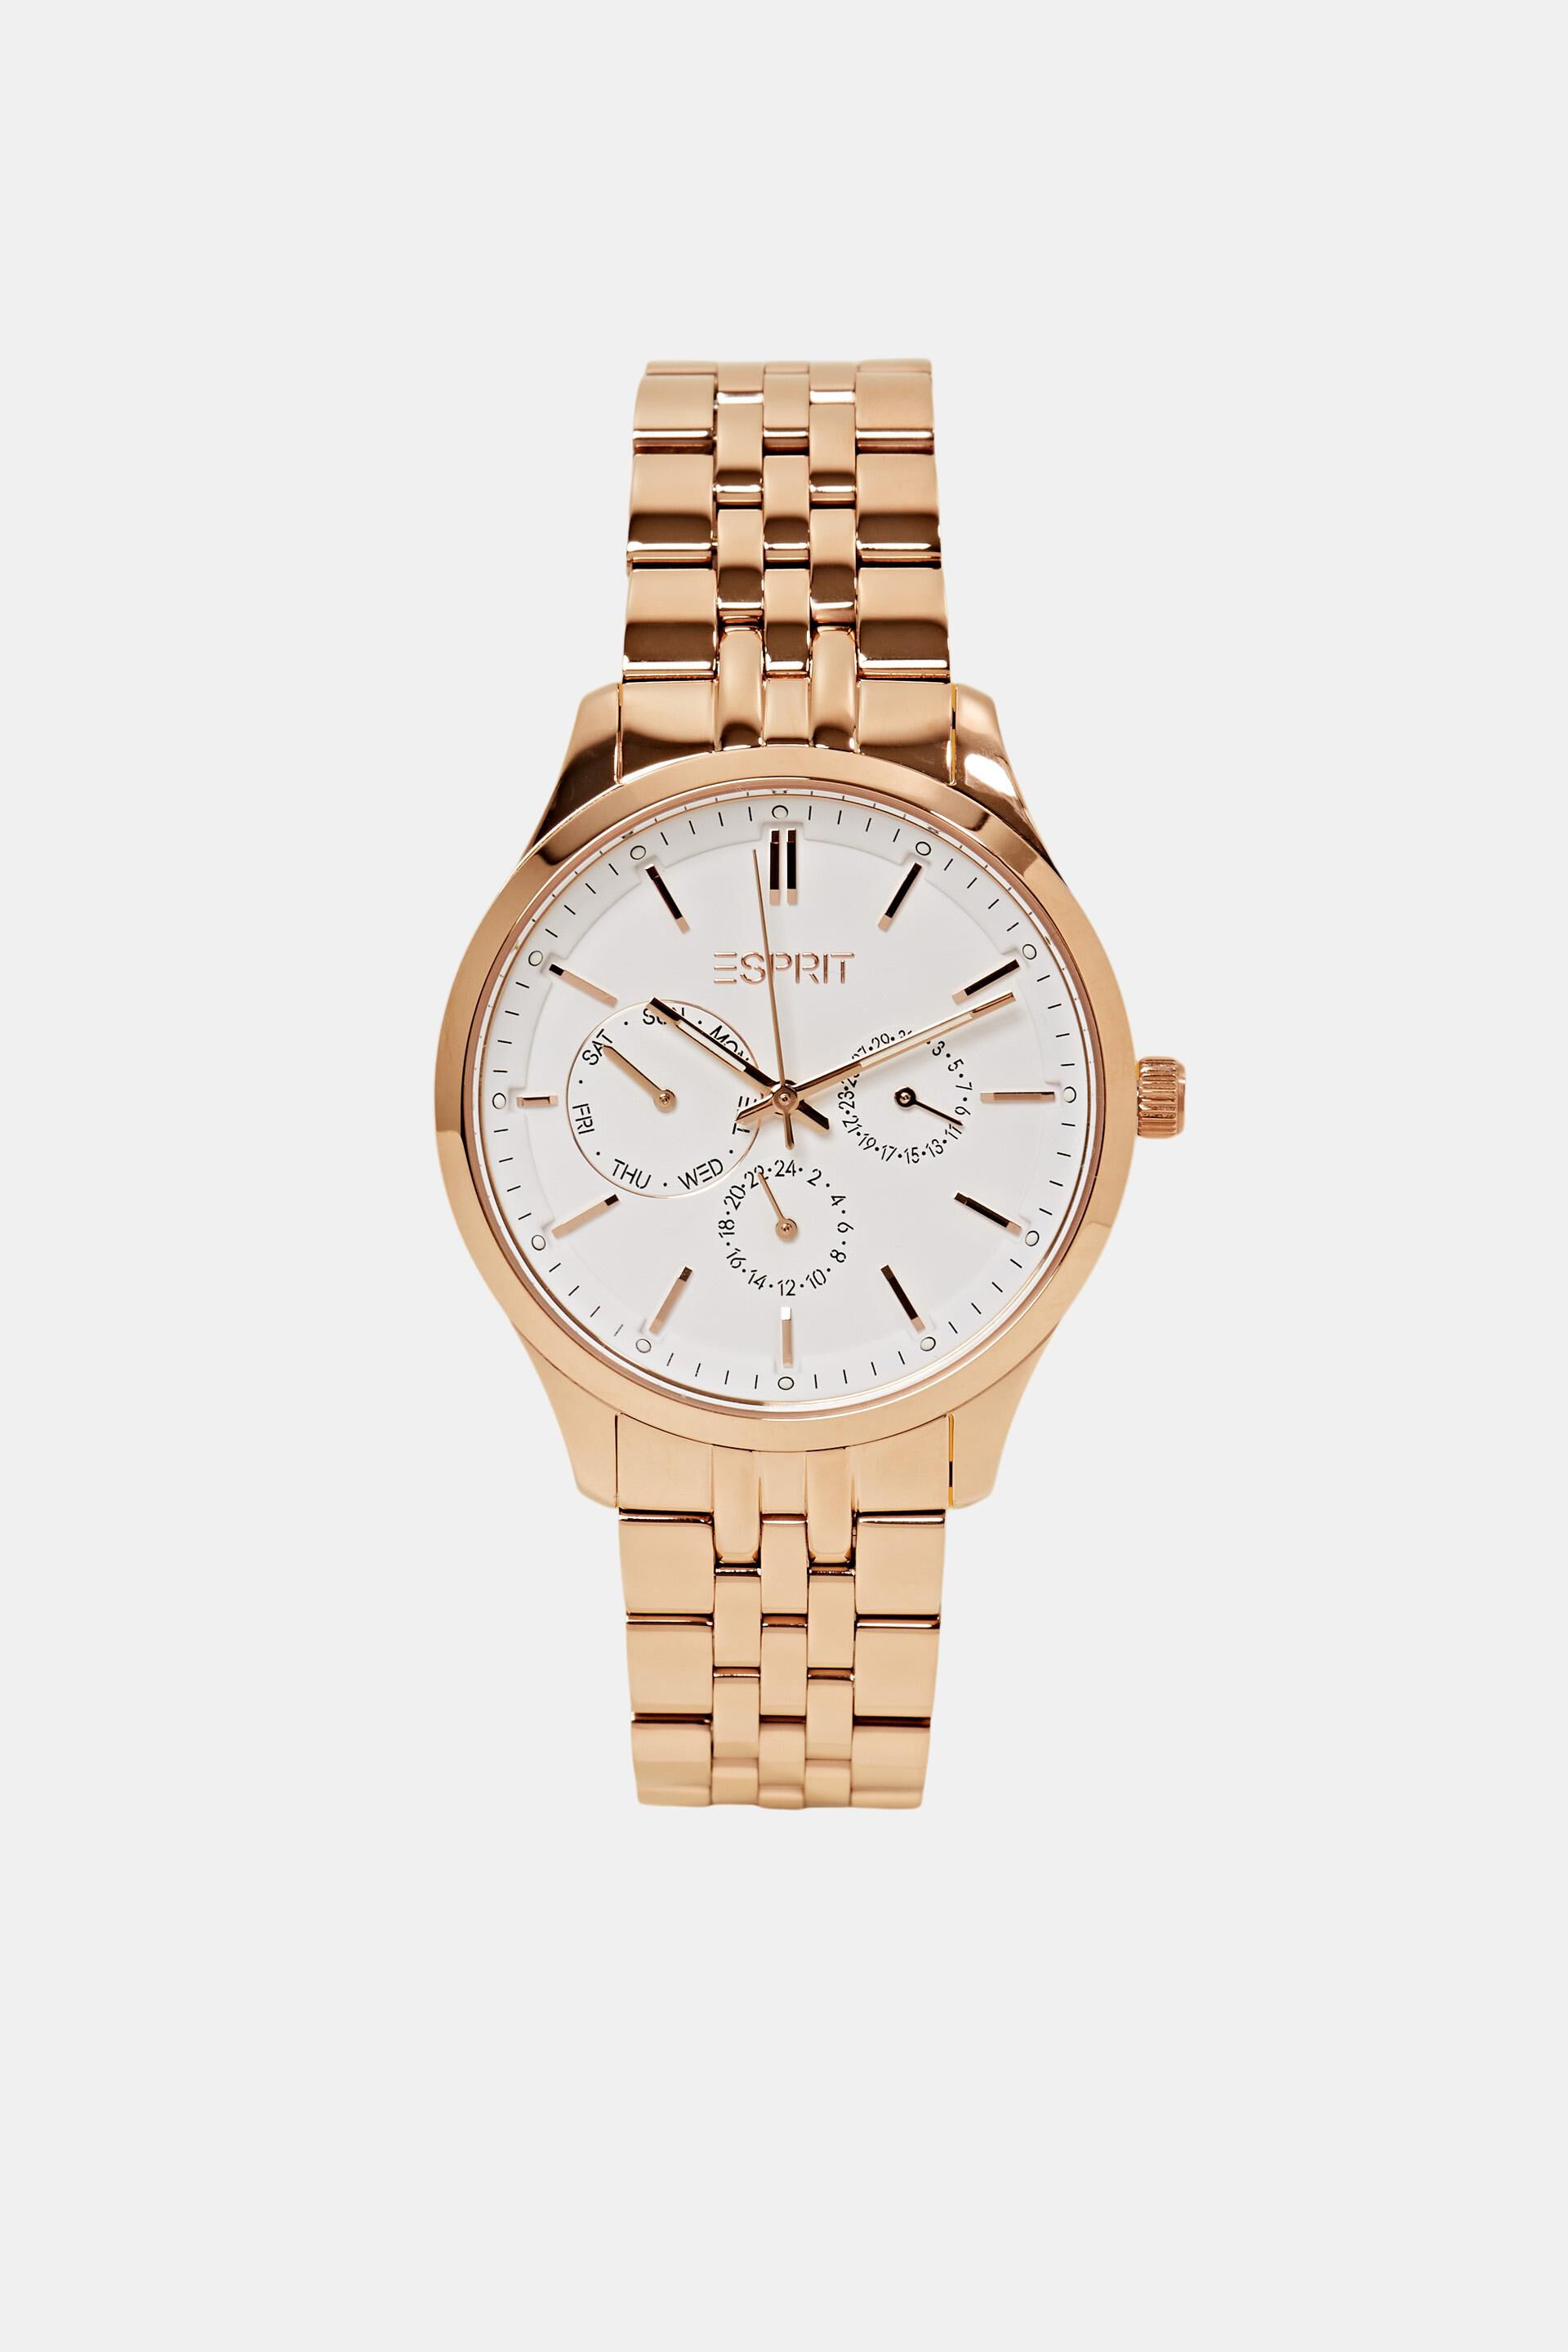 ESPRIT - Multi-functional watch with a link bracelet at our online